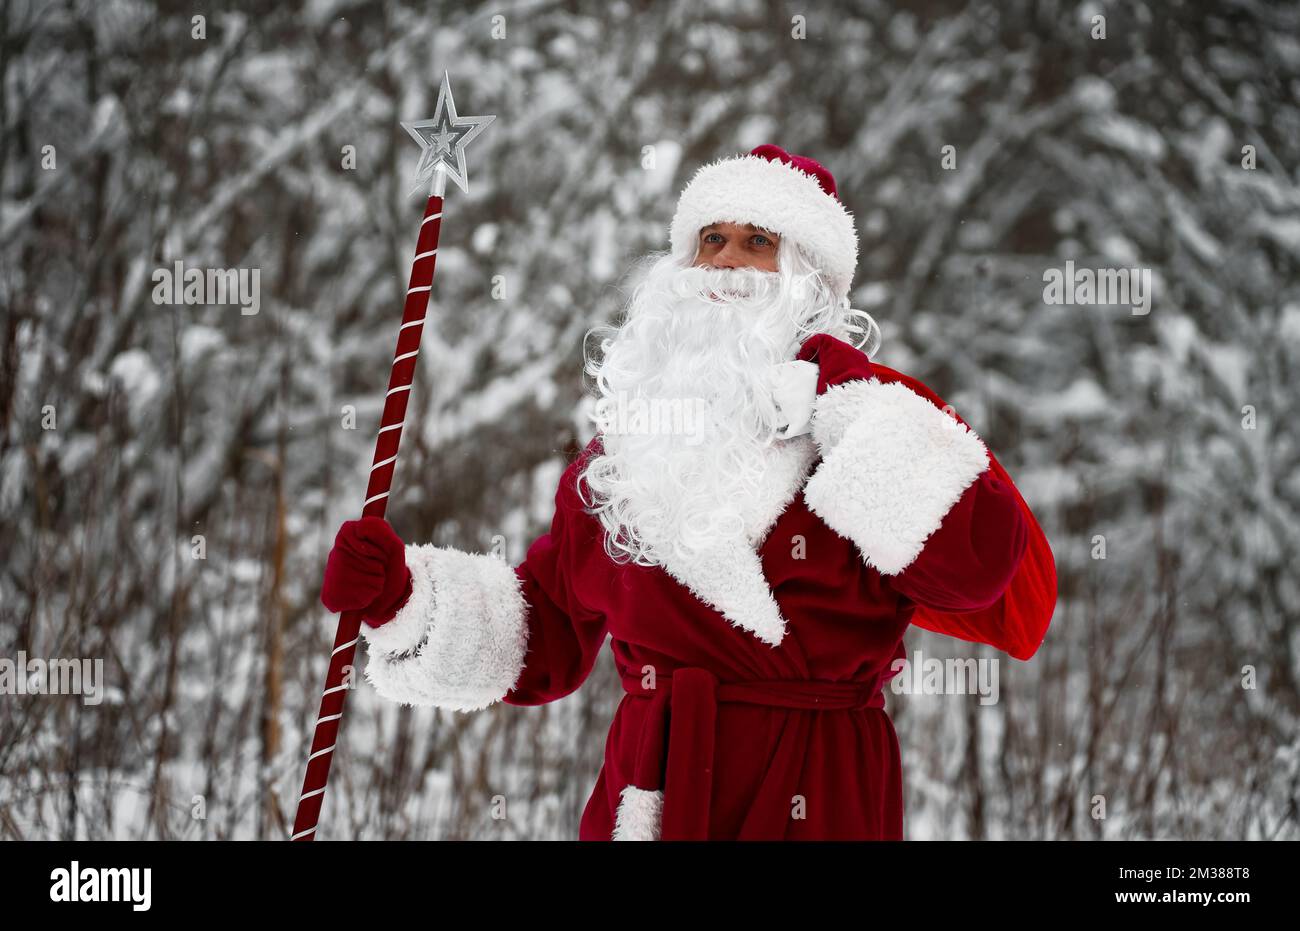 Santa Claus with bag of Christmas gifts is walking in snow forest. Stock Photo